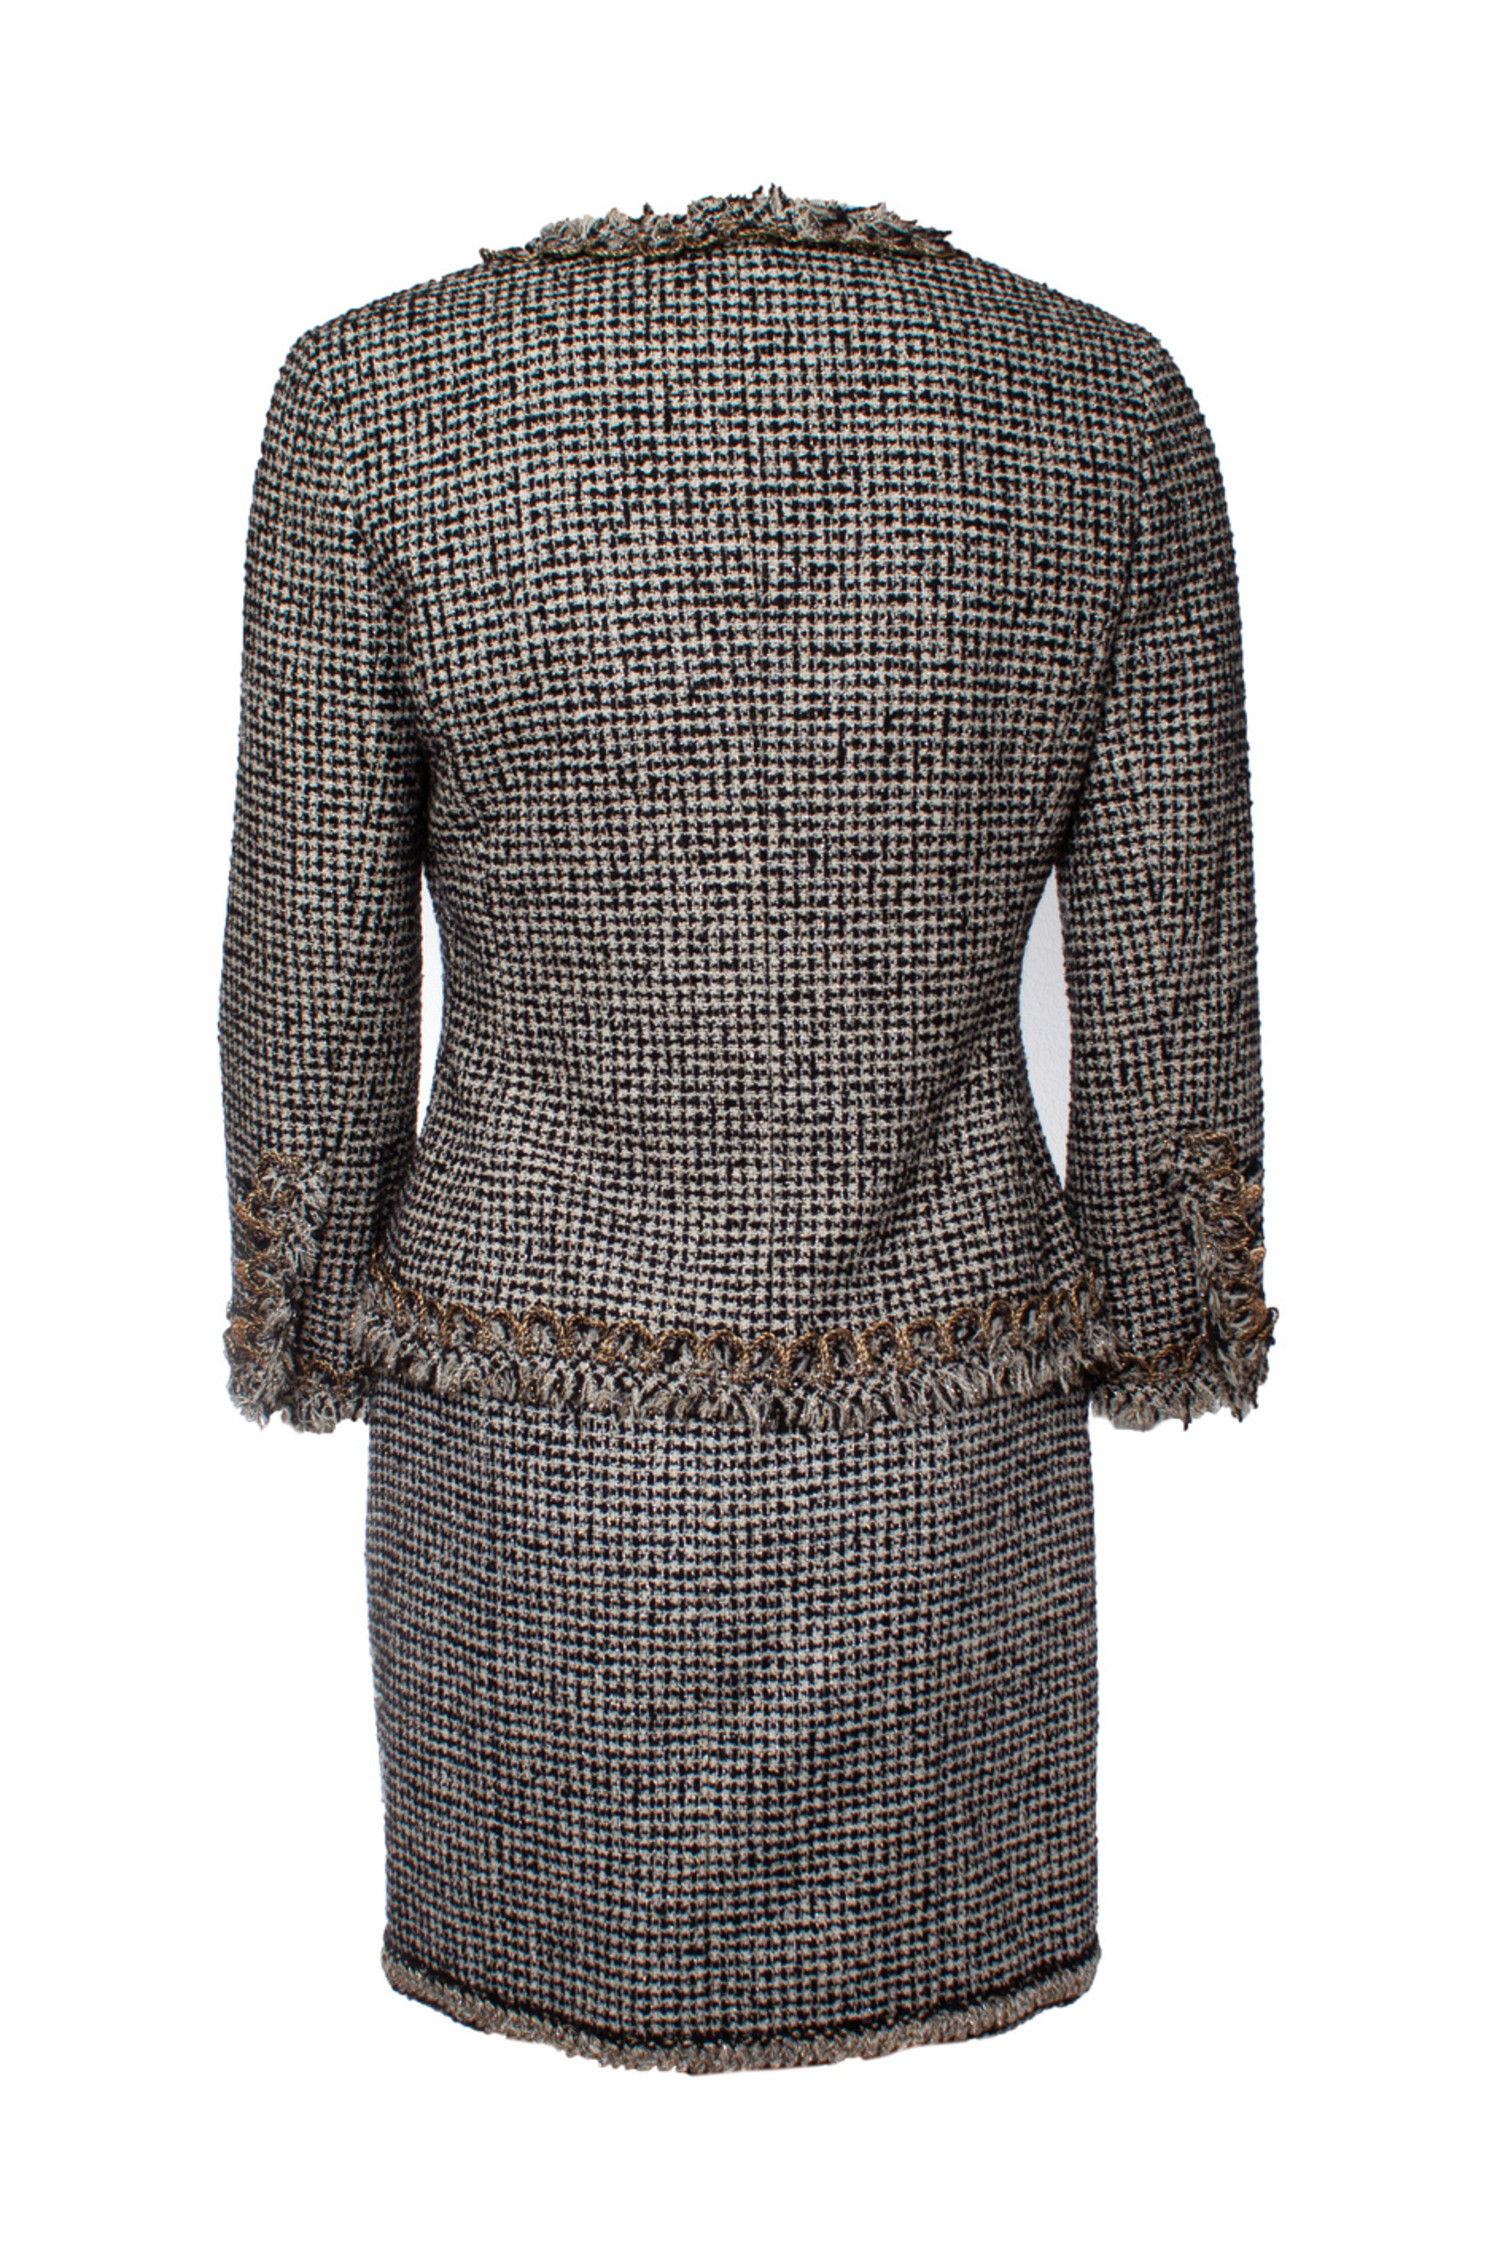 Chanel Tweed Skirt Suit  Rent your Couture